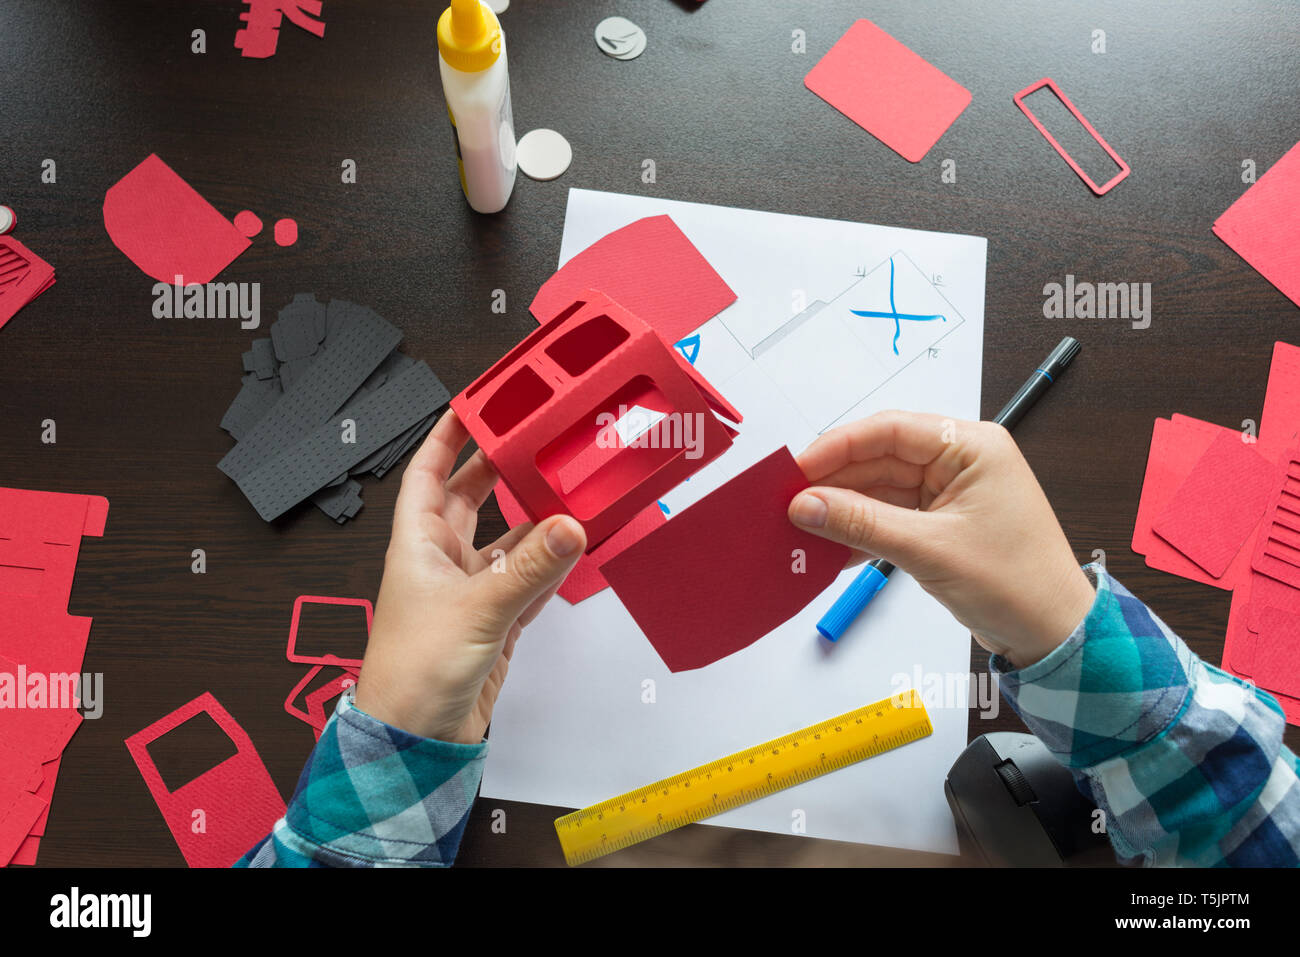 designer working with paper modeling craft template Stock Photo